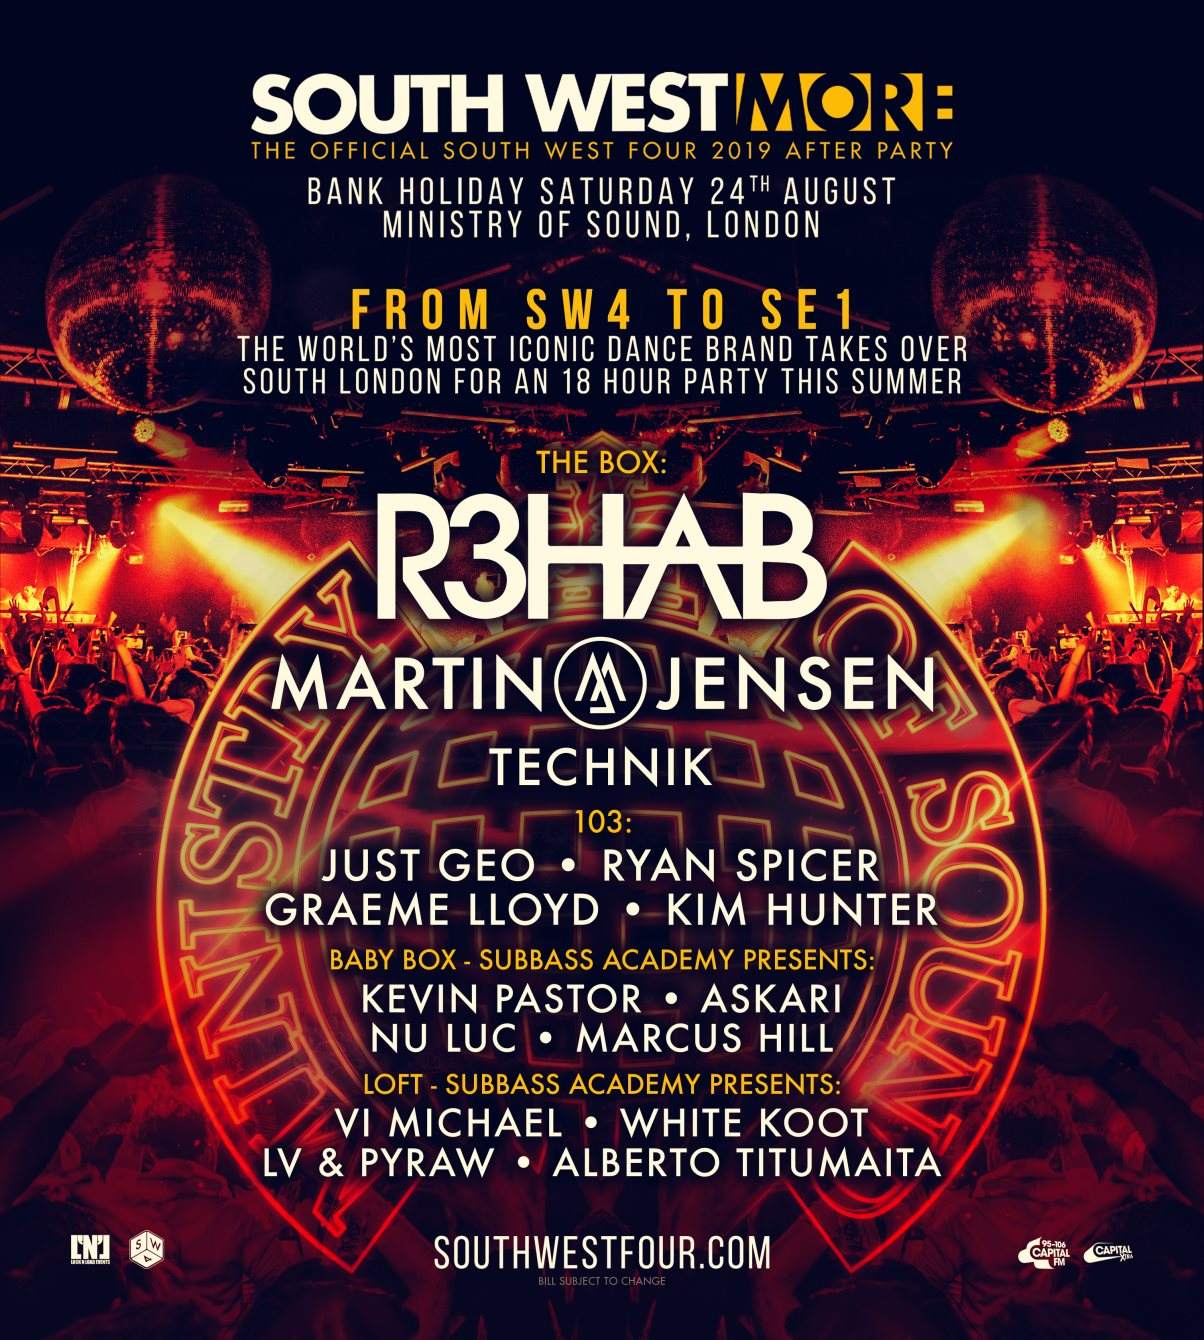 Official SW4 Afterparty: South West More - Página frontal